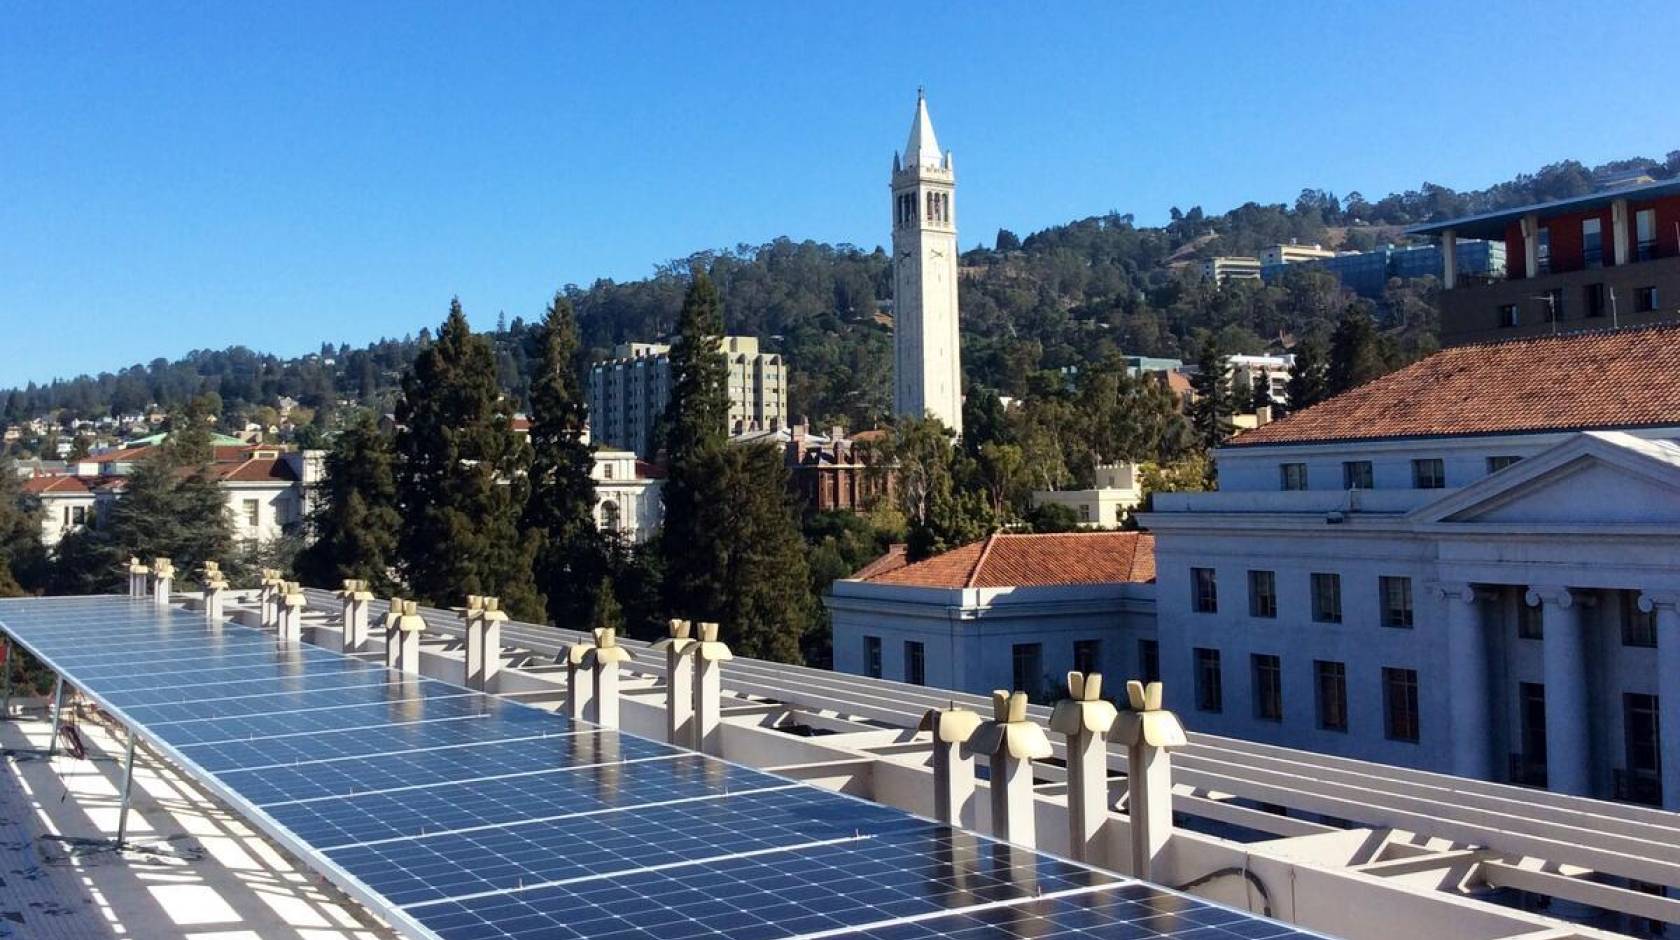 Solar panels on UC Berkeley campus, Campanile in the background